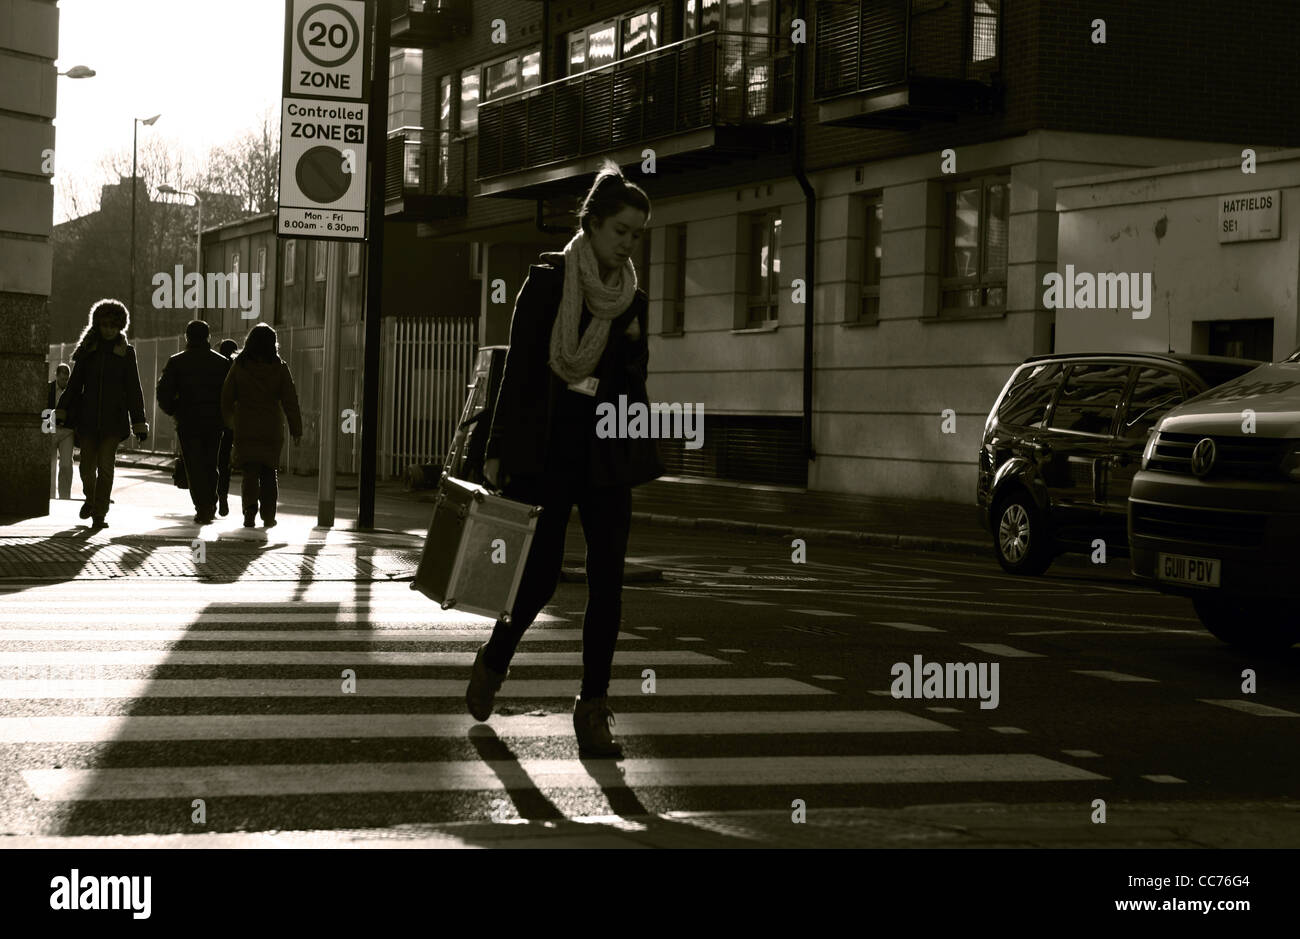 a female walks across a zebra crossing in London while a vehicle waits and people walk in the background, photographed in sepia Stock Photo